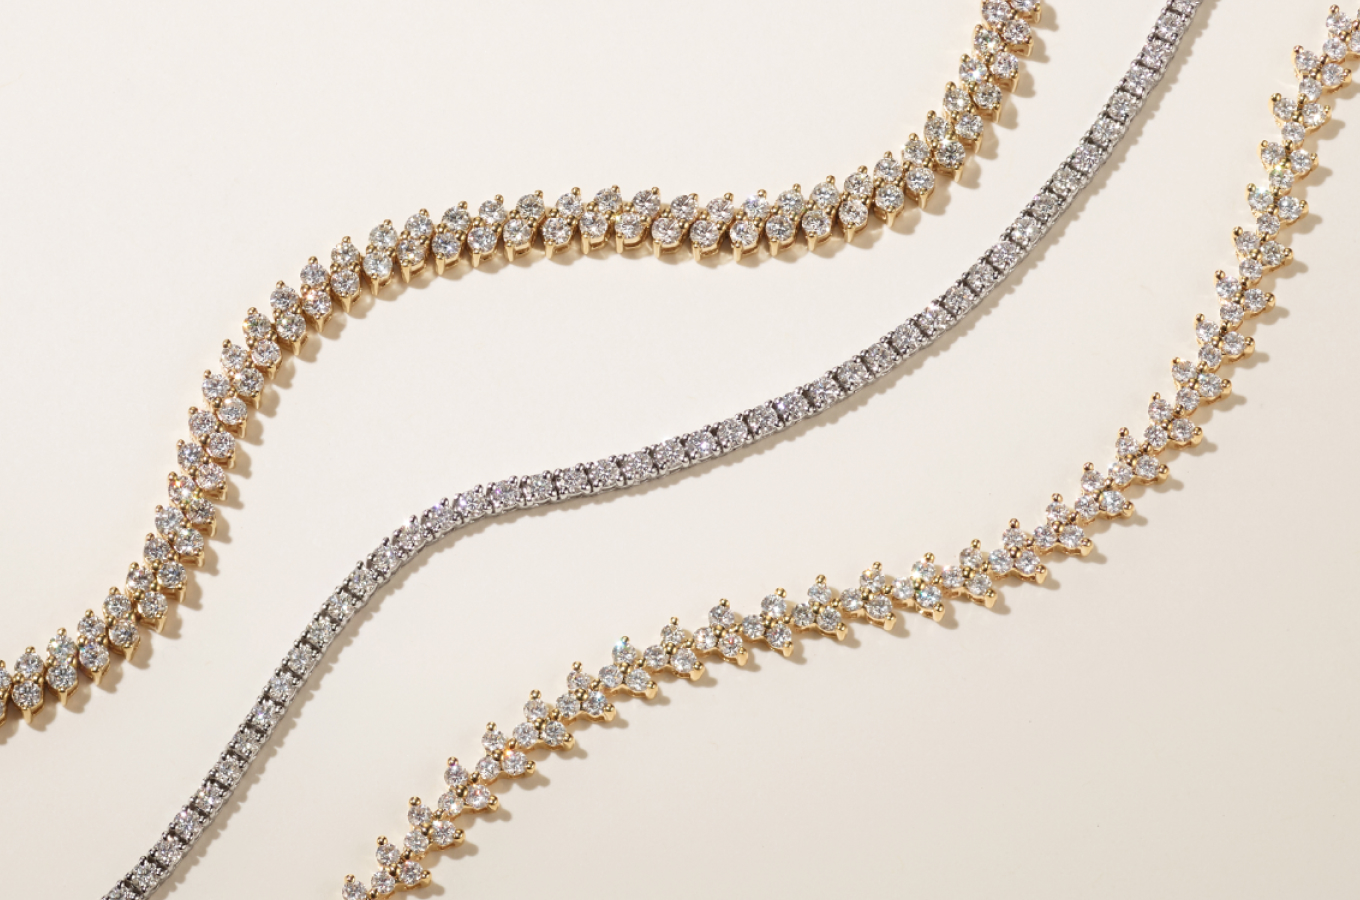 Glacier Double Row 4 tcw Diamond Bracelet (7 in) This stunning bracelet features two staggered rows of natural diamonds for a luxe look. Crafted in warm 14-karat yellow gold, the diamonds are hand-matched for consistent sparkle and beauty. 5 tcw Diamond Tennis Necklace Add sparkle to any look with this natural diamond tennis necklace. Crafted in bright 14-karat white gold, the diamonds are hand-matched for consistent beauty. A secure box clasp with a figure-eight safety latch offers worry-free wear. Holly 3 tcw Diamond Tennis Bracelet (7 in) Trios of natural diamonds form a beautiful, sparkling pattern along this 14-karat yellow gold tennis bracelet. A secure box clasp and figure-eight safety latch offer worry-free wear.